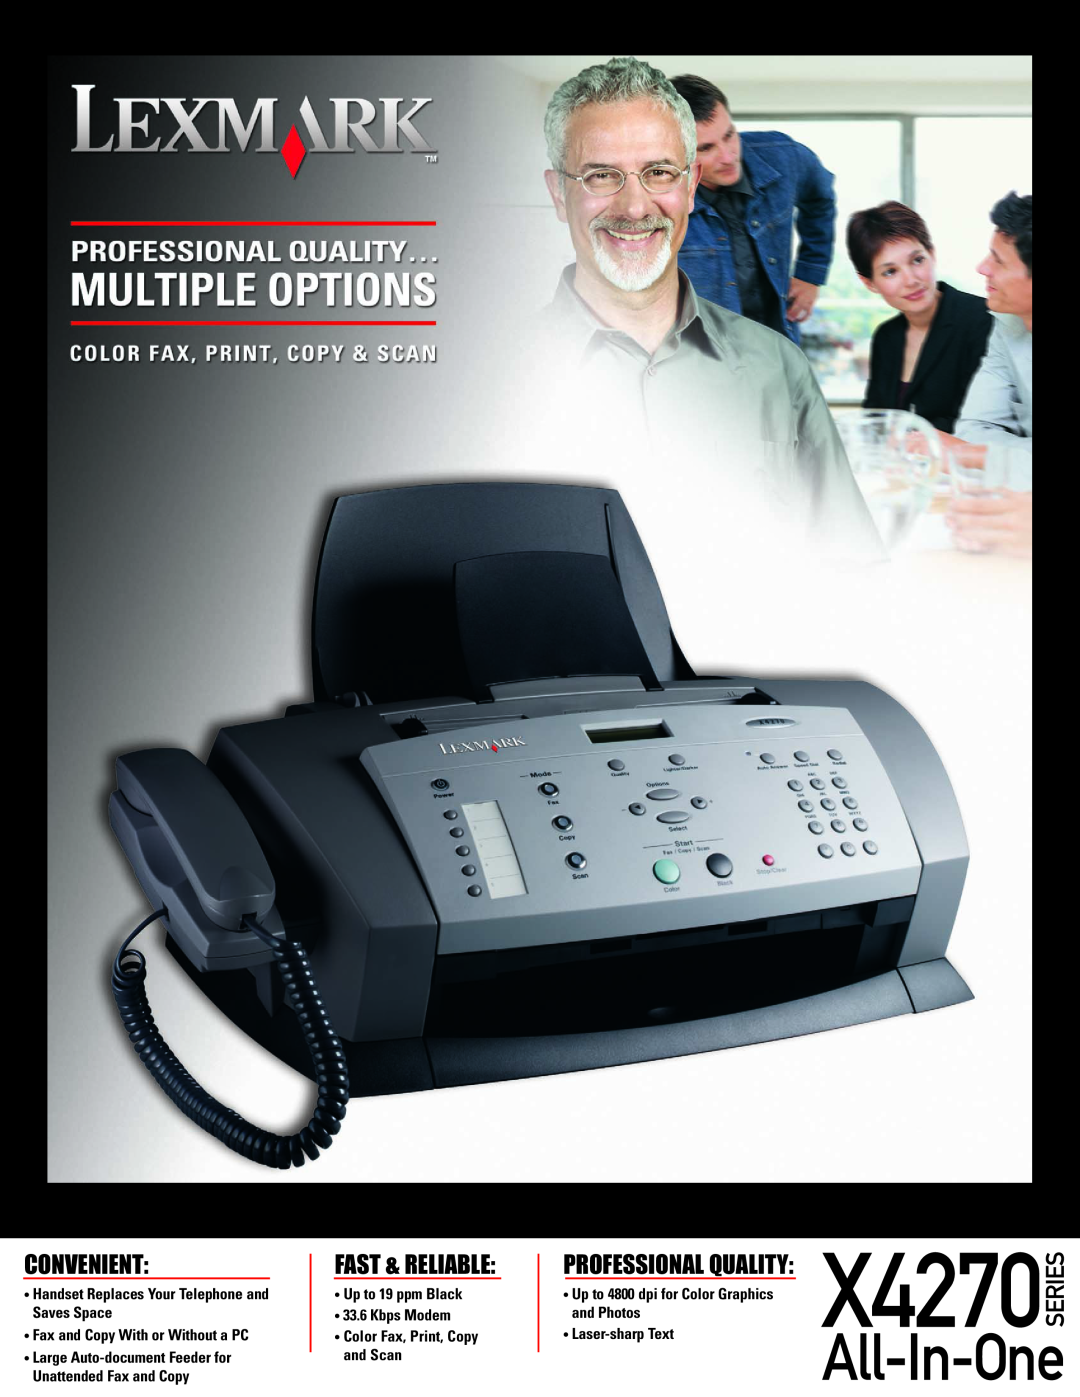 Lexmark X4270 Series manual Convenient, Fast & Reliable, Professional Quality, Fax and Copy With or Without a PC 